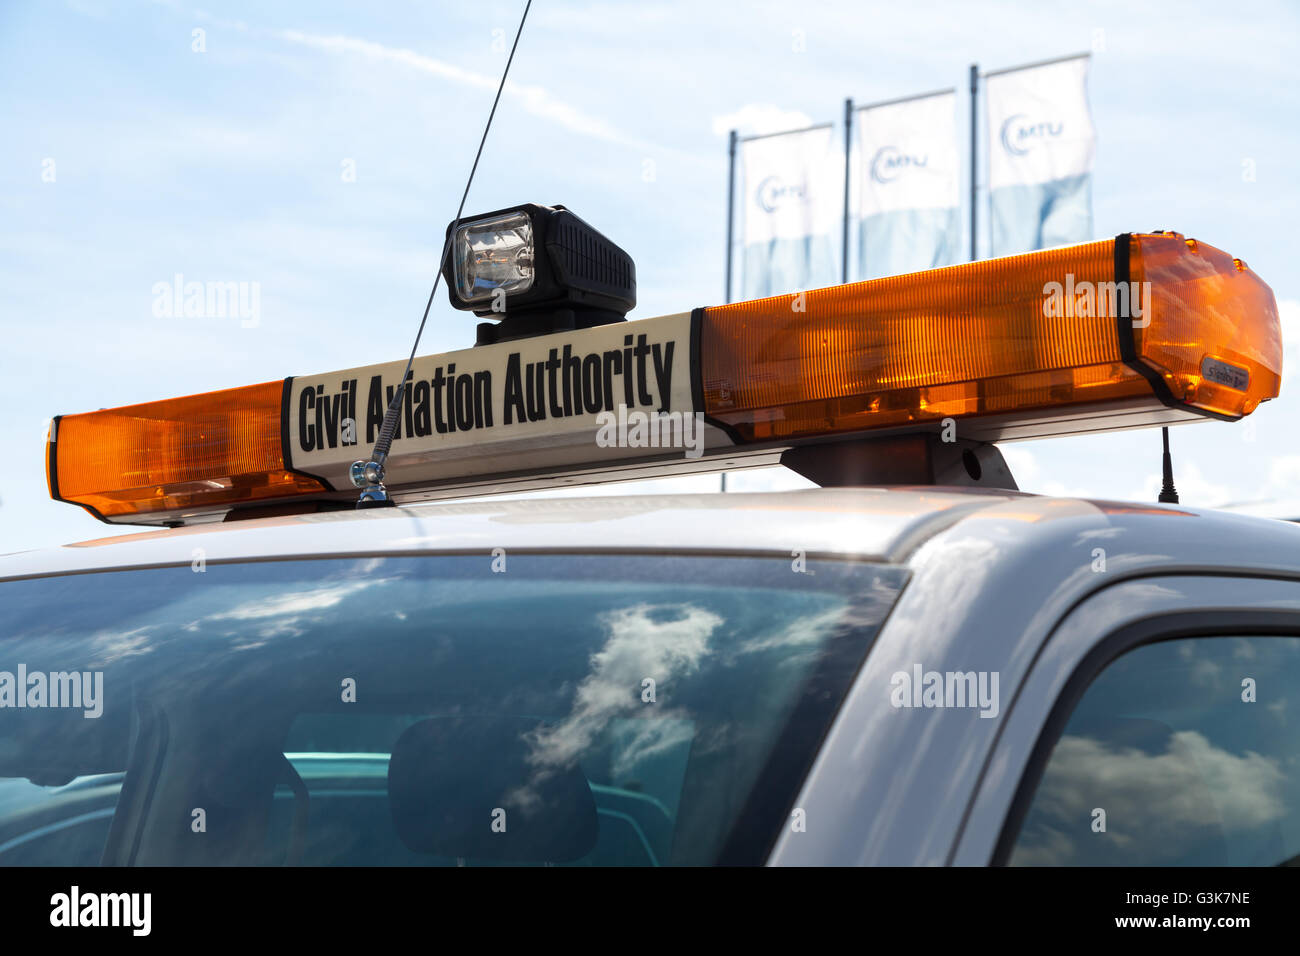 BERLIN / GERMANY - JUNE 3, 2016: an civil aviation authority car stands on airport in schoenefeld / berlin, germany at june 3, 2 Stock Photo